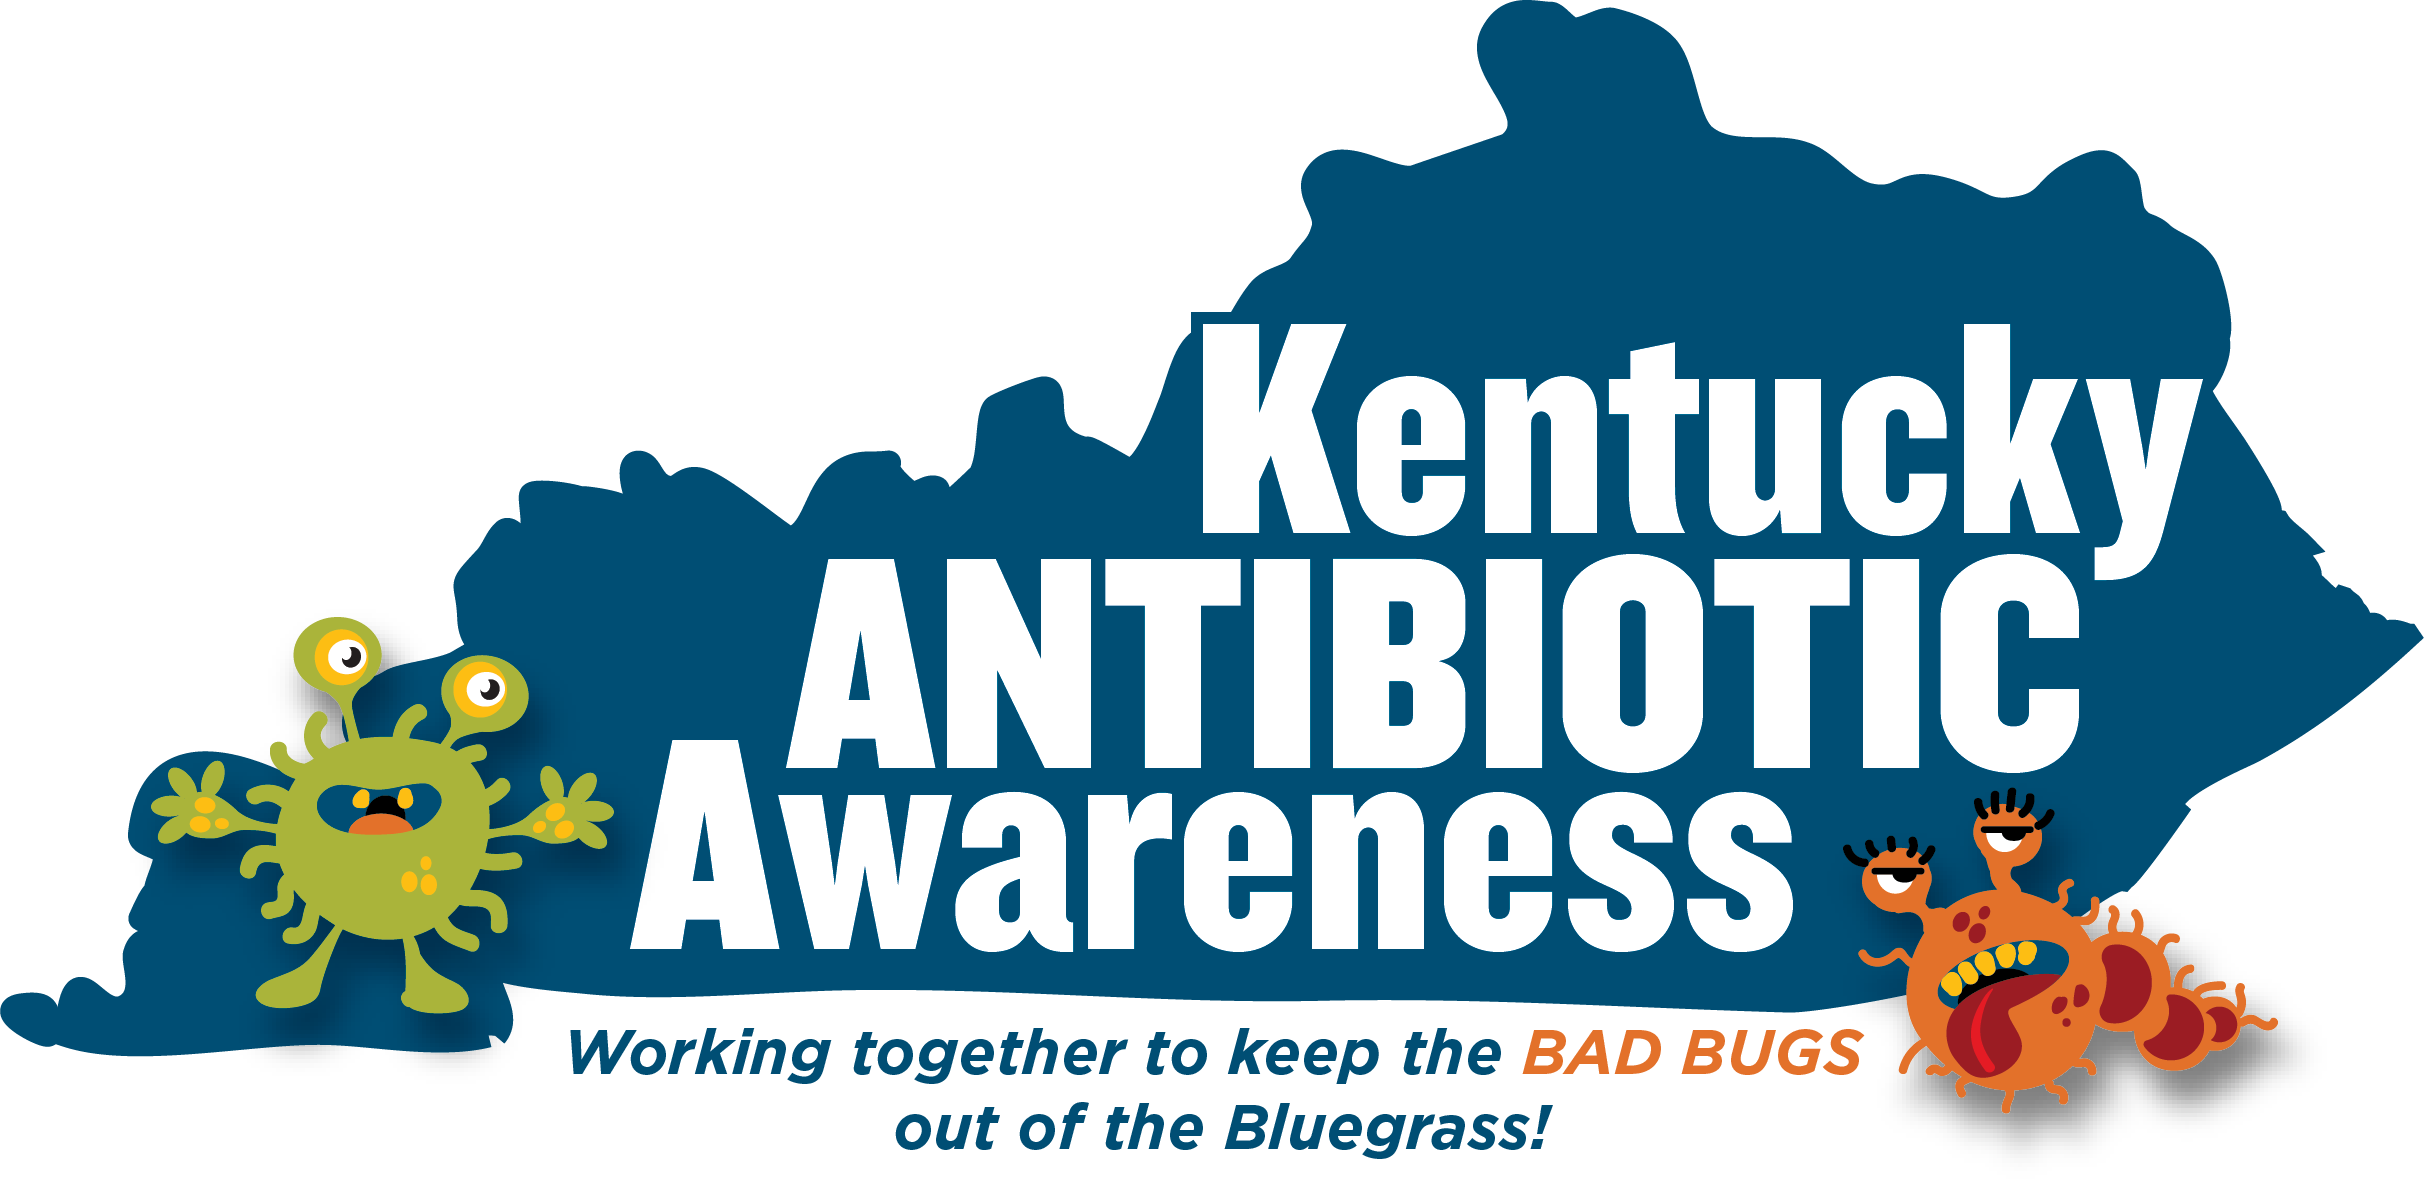 Kentucky has highest antibiotic prescribing rate in U.S.; campaign aims to curb overuse